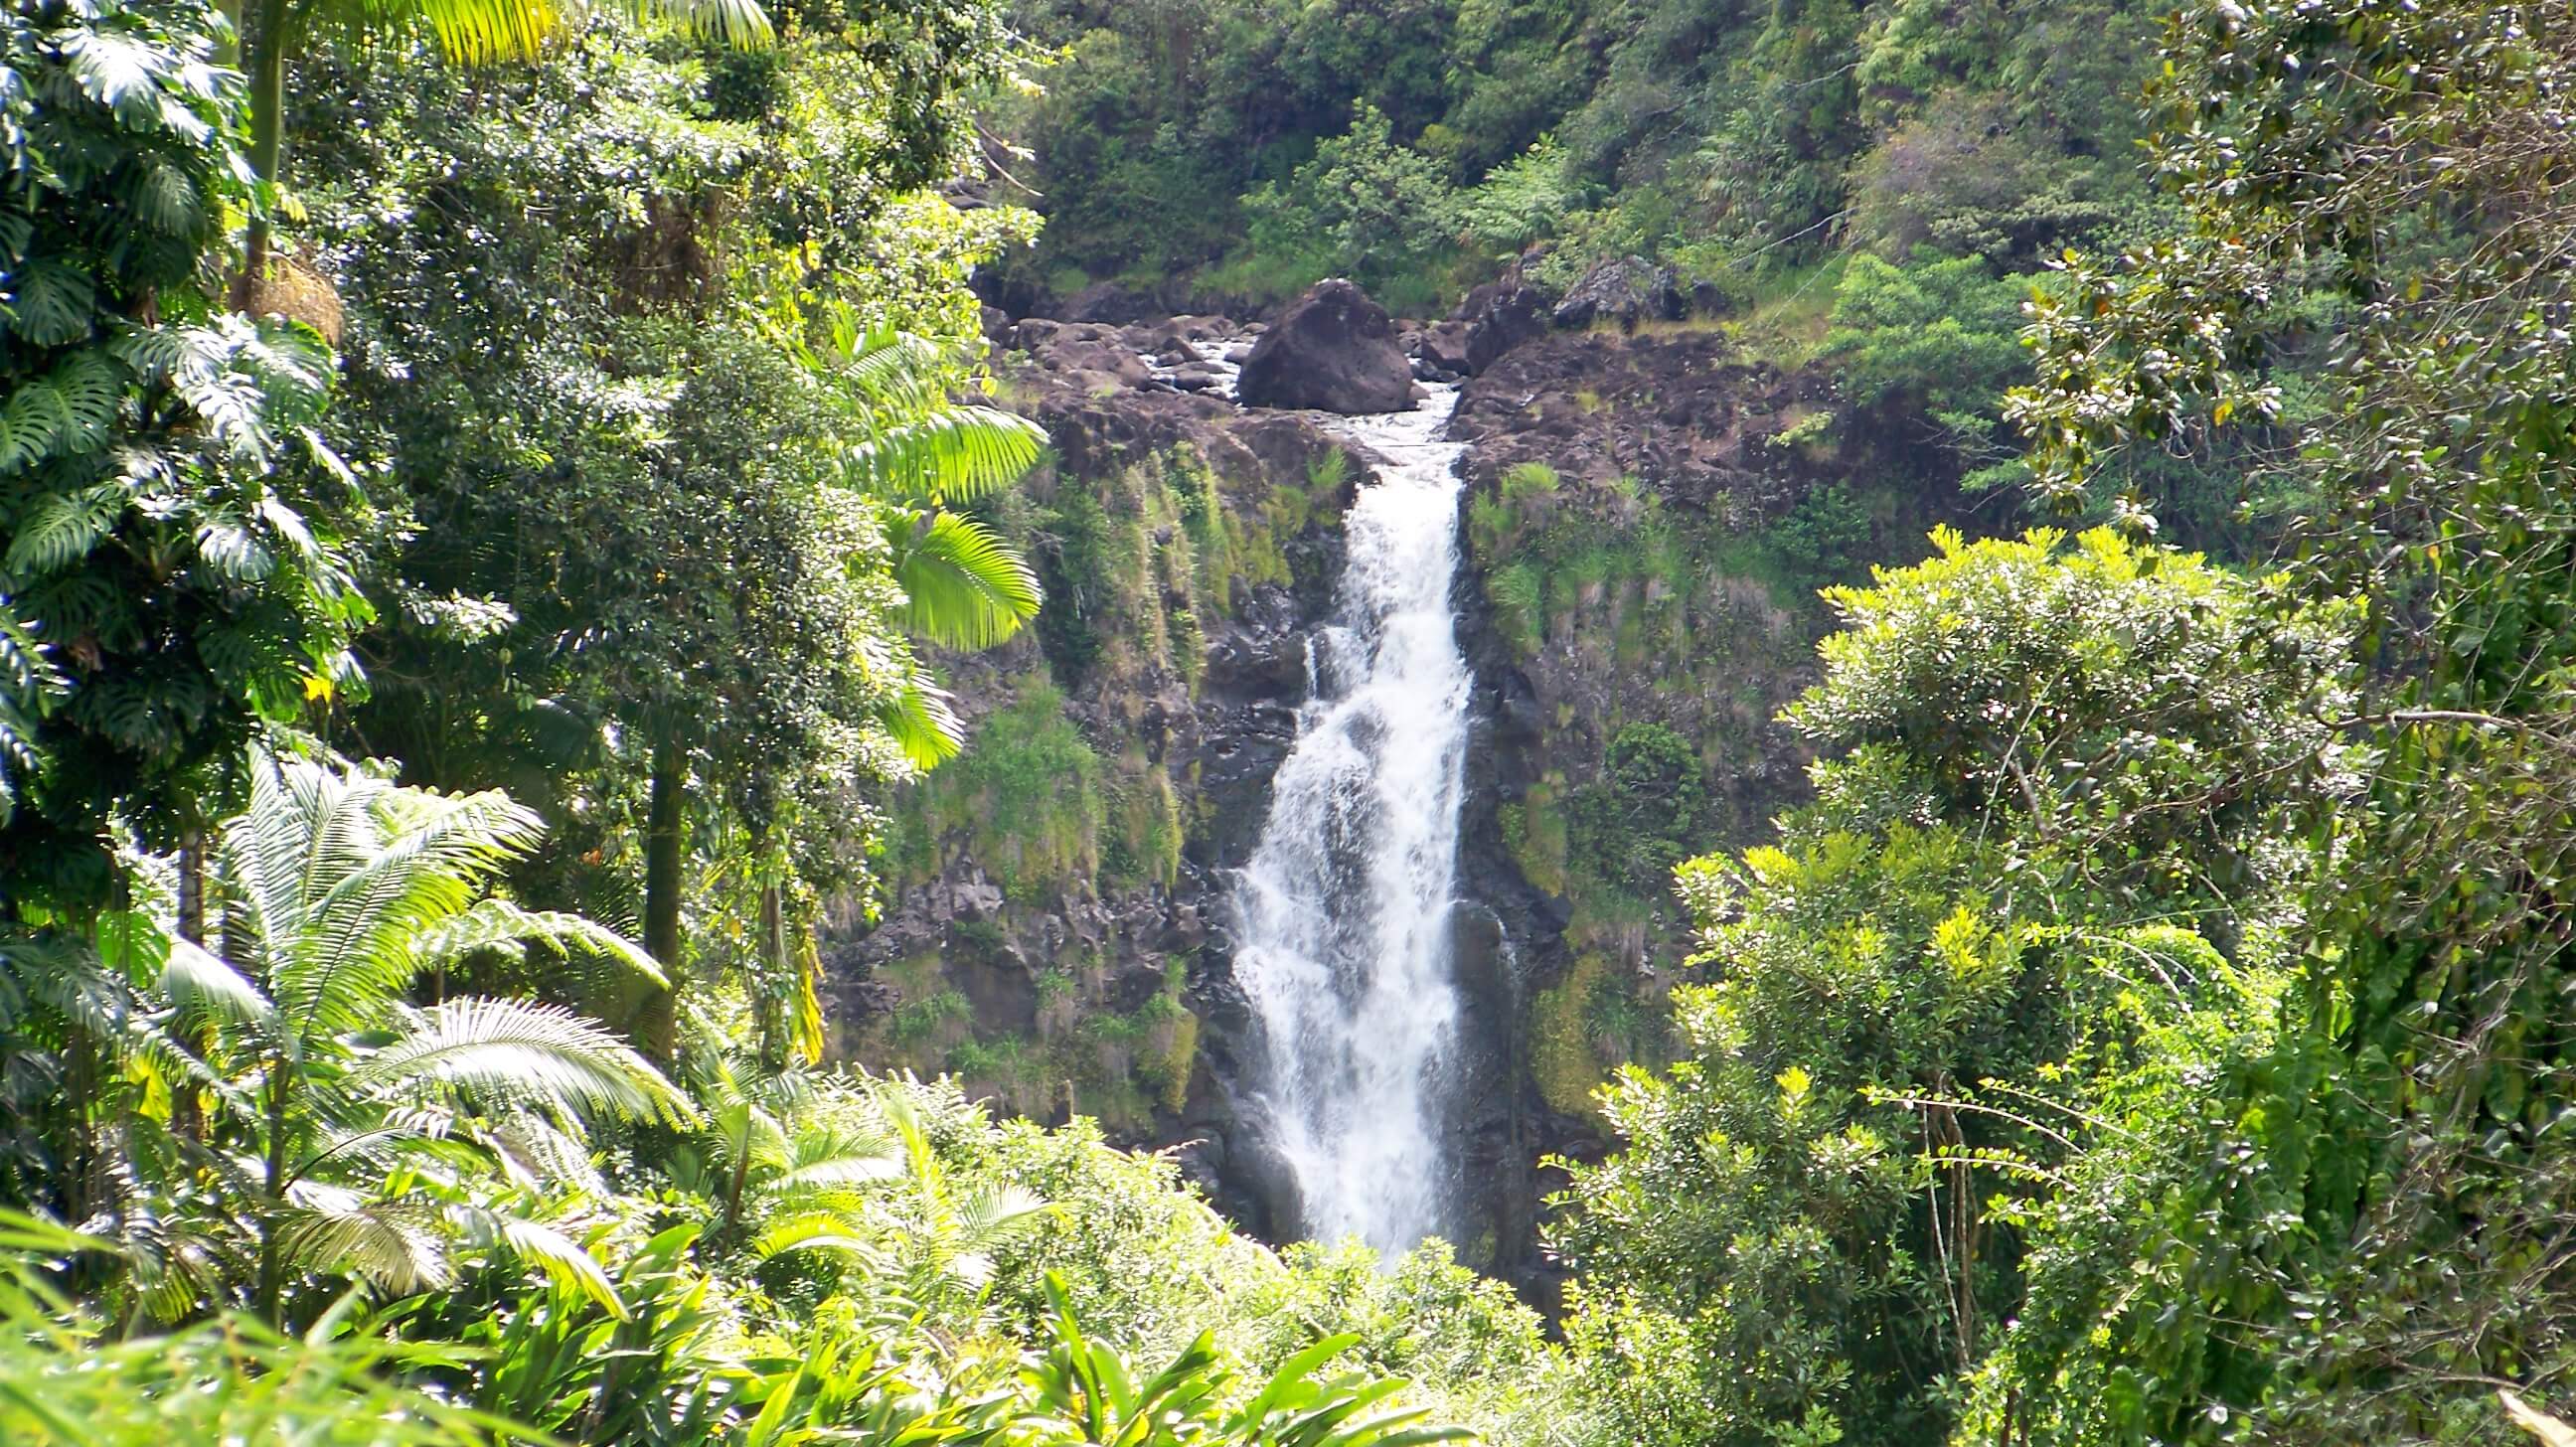 Kahuna Falls in Hawaii.
Flickr User Colonel Max